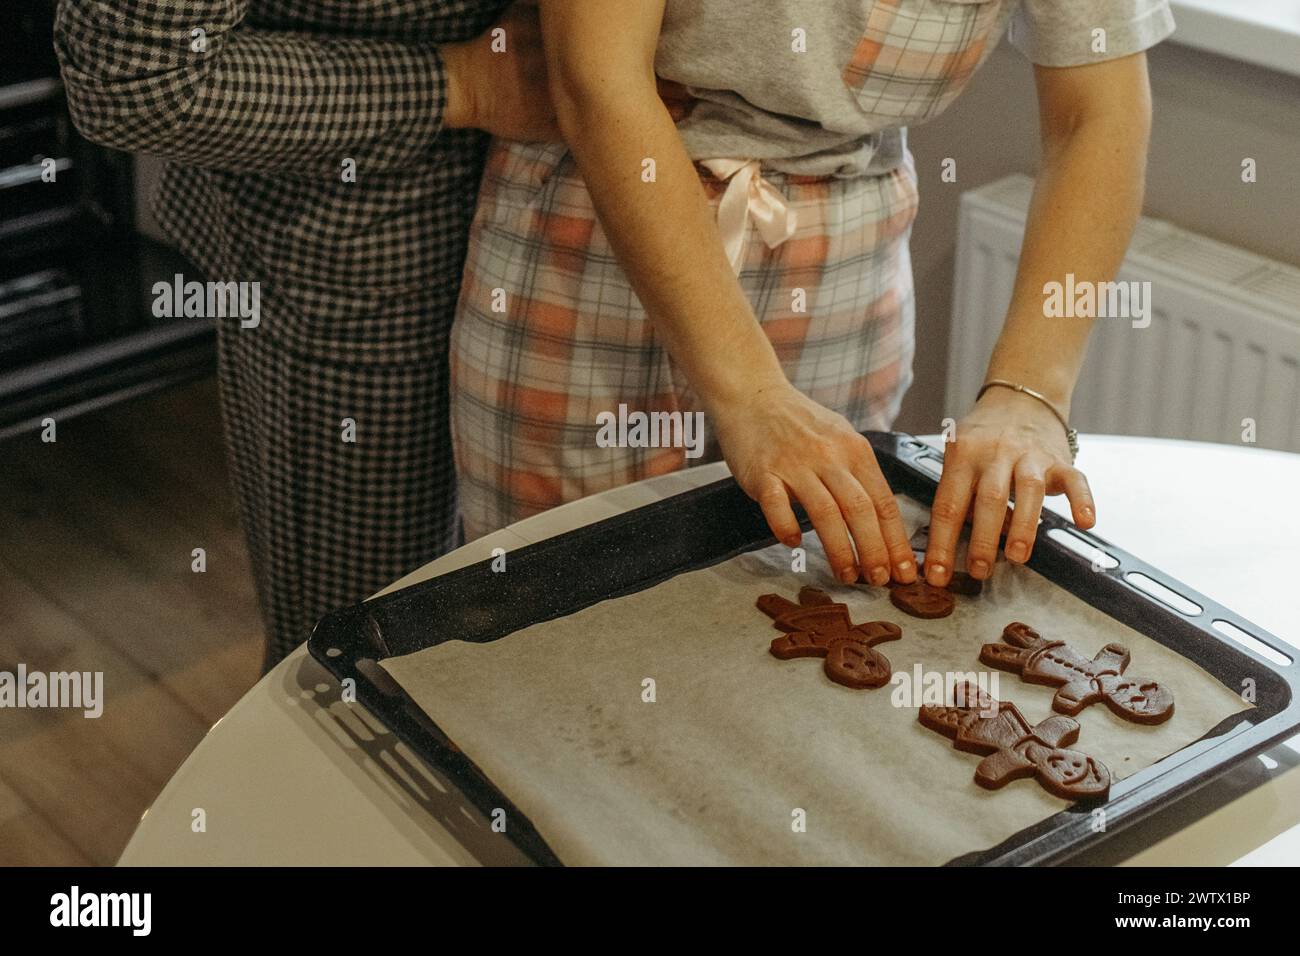 Two individuals are actively engaged in the process of making cookies in a kitchen setting. They are mixing ingredients, shaping dough, and placing co Stock Photo